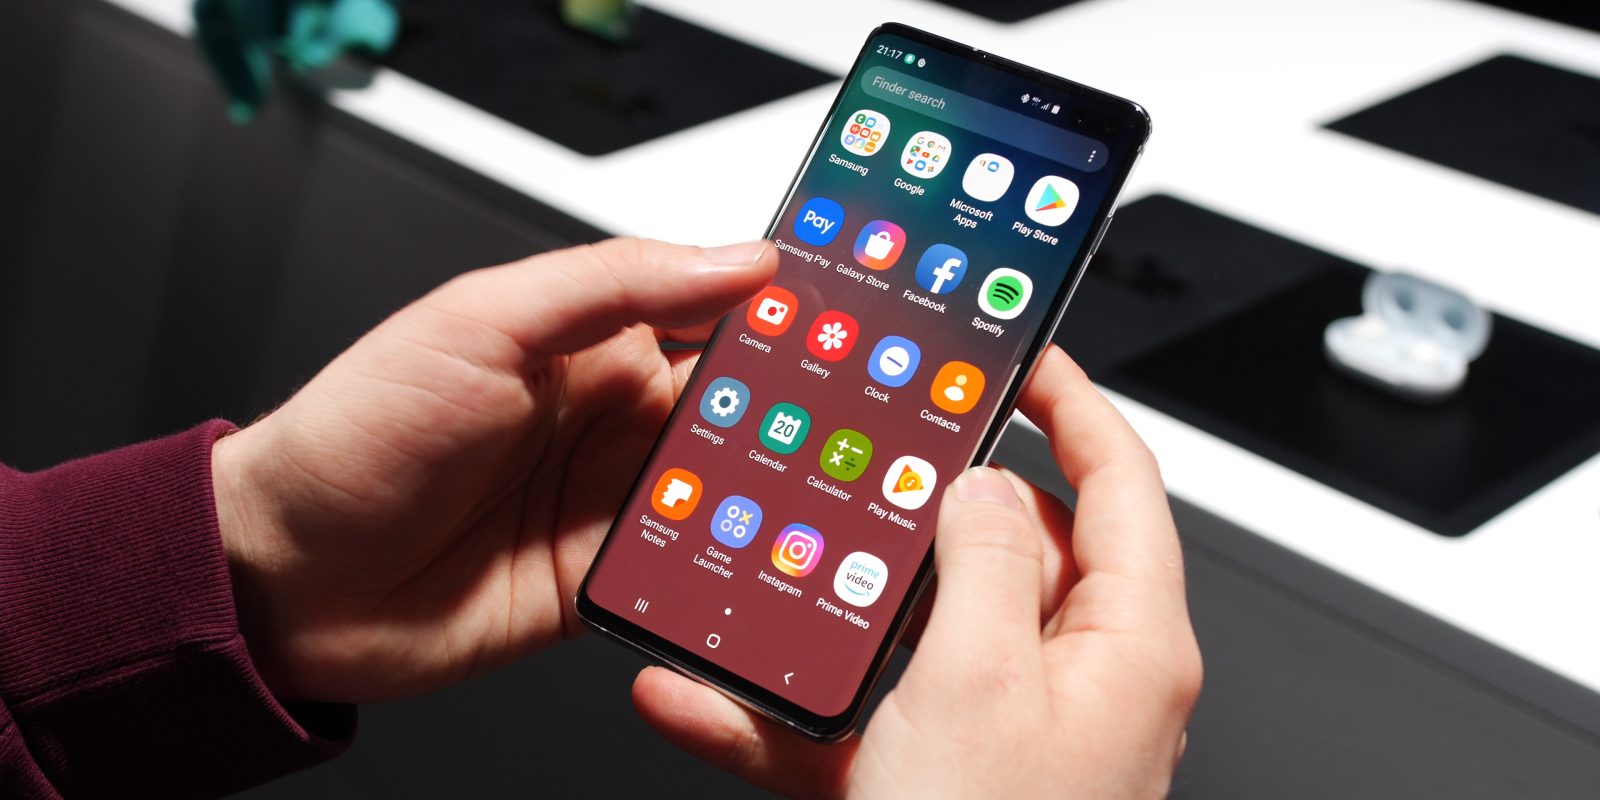 How To Schedule The Auto Restart Feature On Galaxy S10 Devices